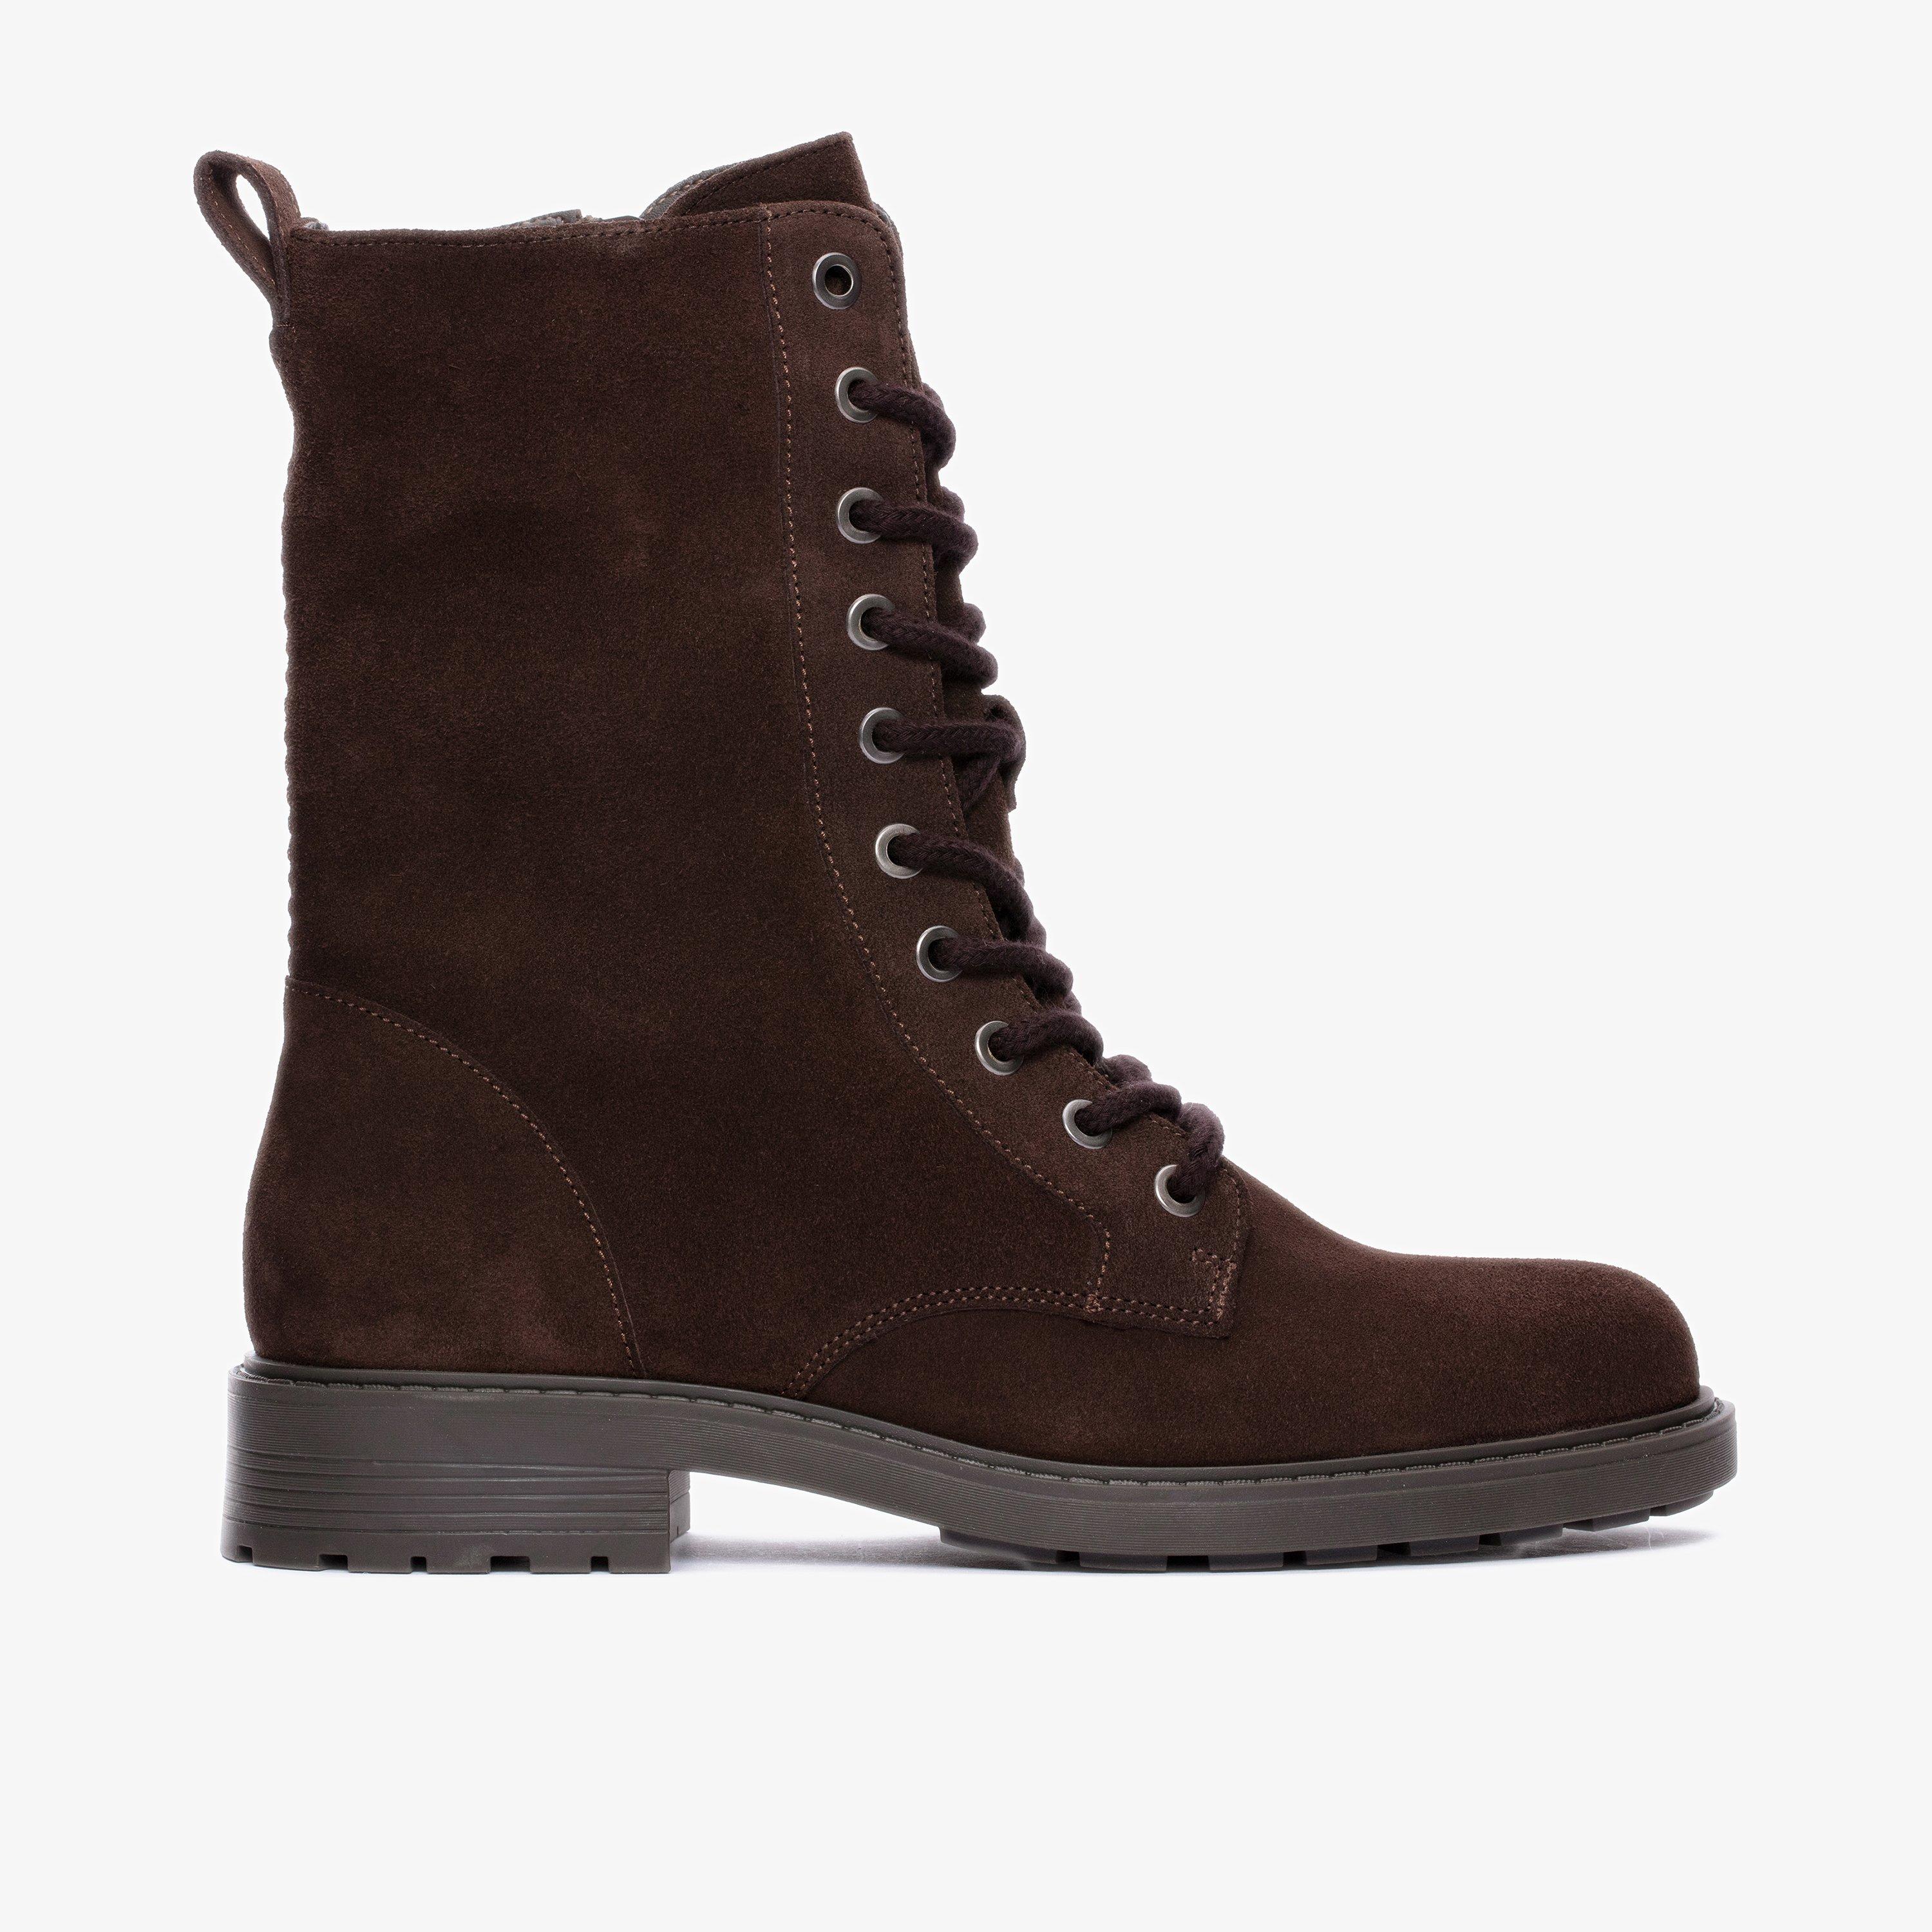 Womens Orinoco2 Style Dark Brown Suede Boots | Clarks Outlet